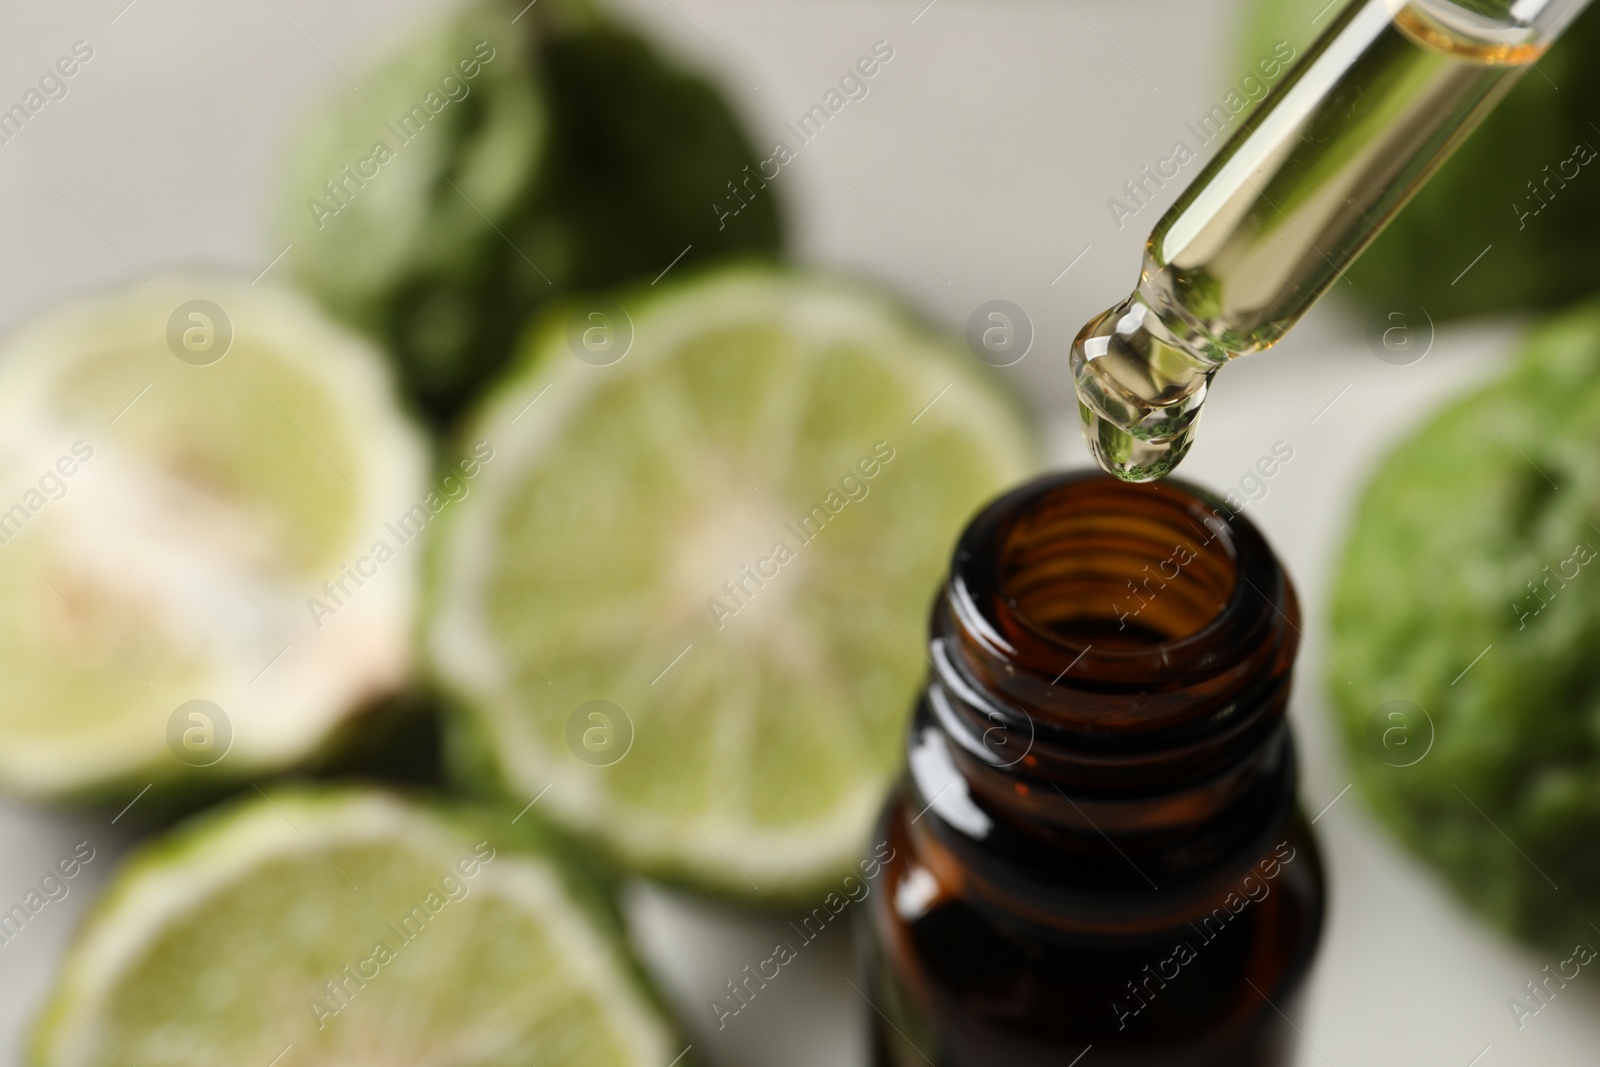 Photo of Dripping bergamot essential oil into glass bottle on table, closeup